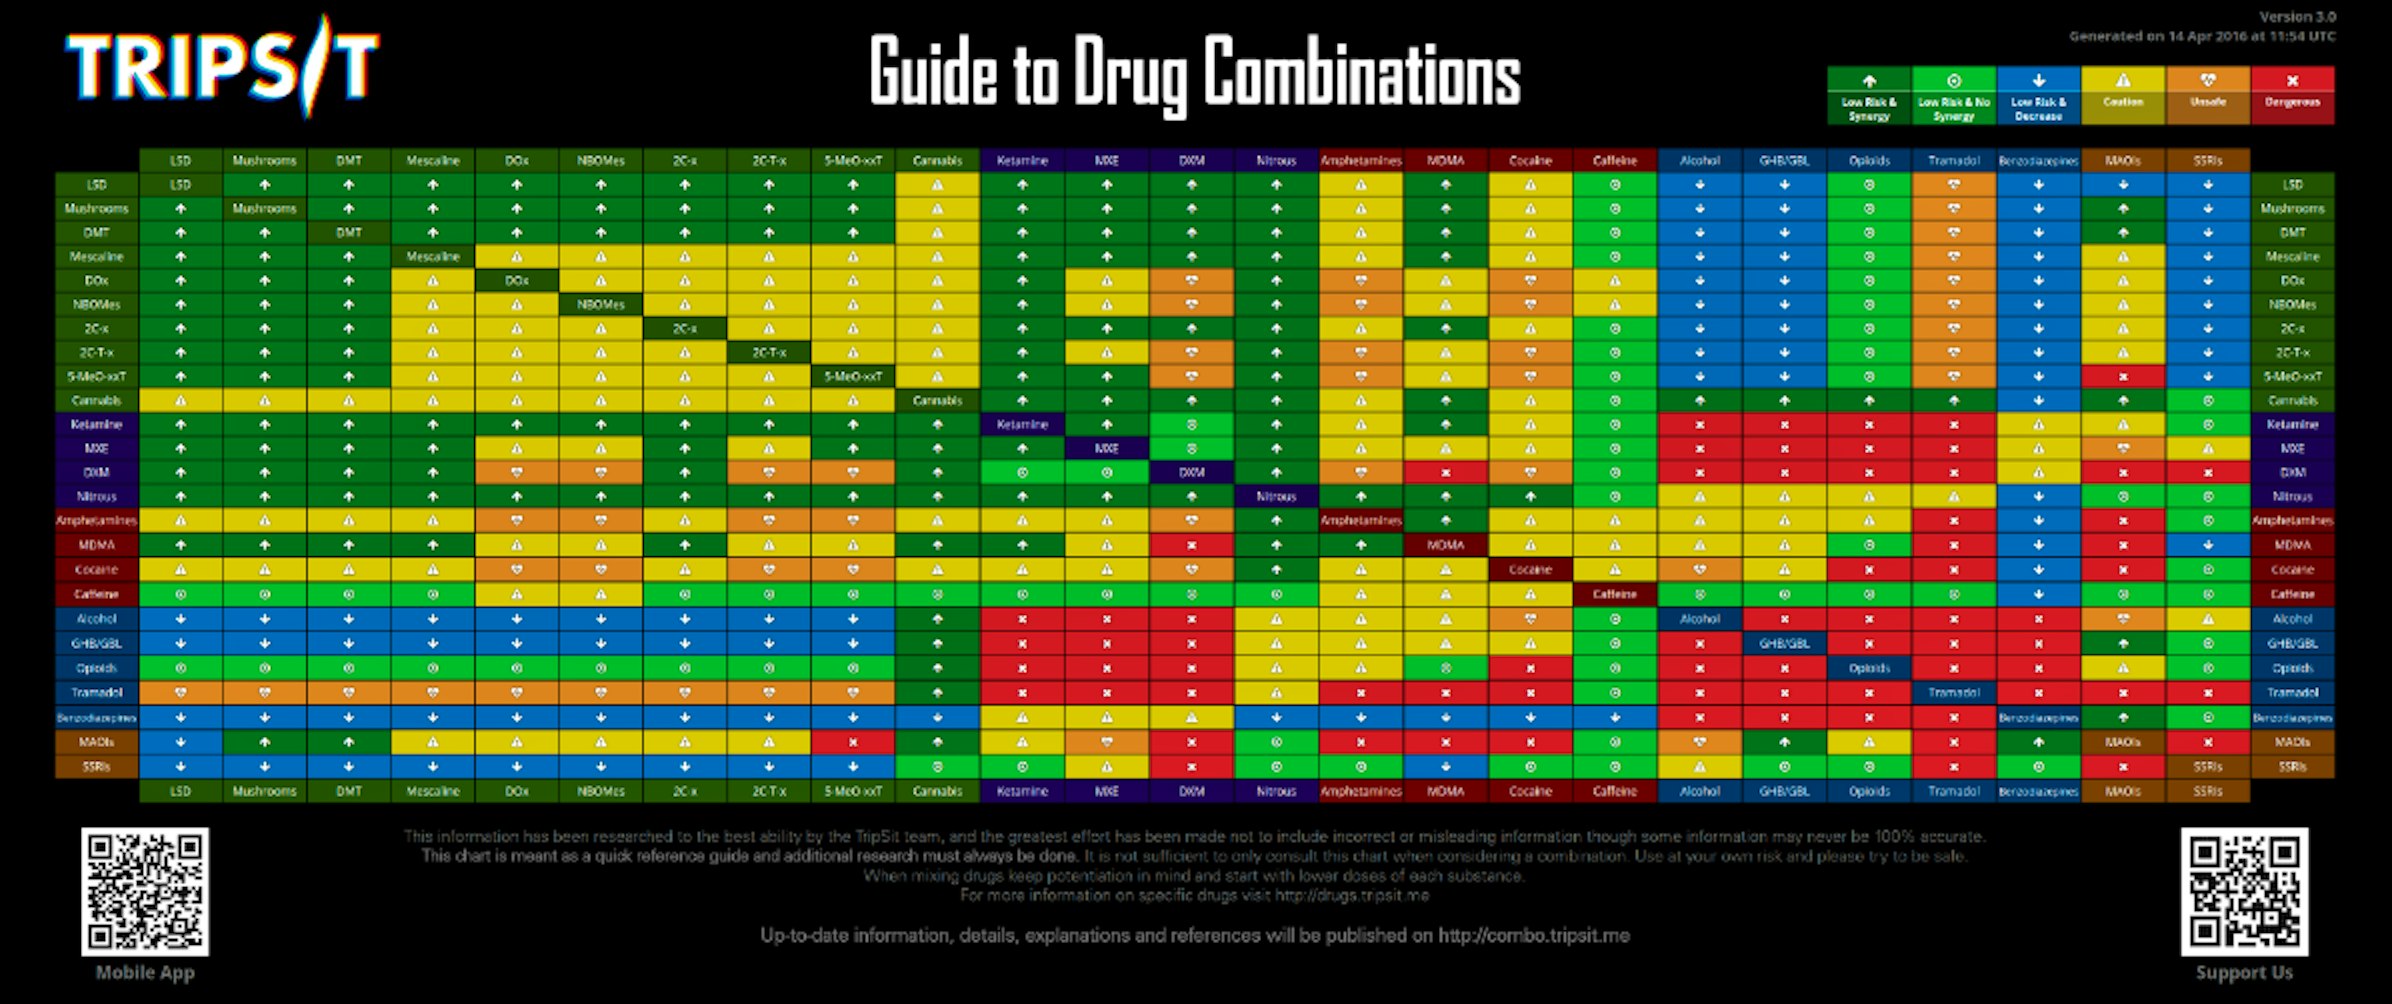 The Scientific Way to Plan a Drug Schedule for a MultiDay Music